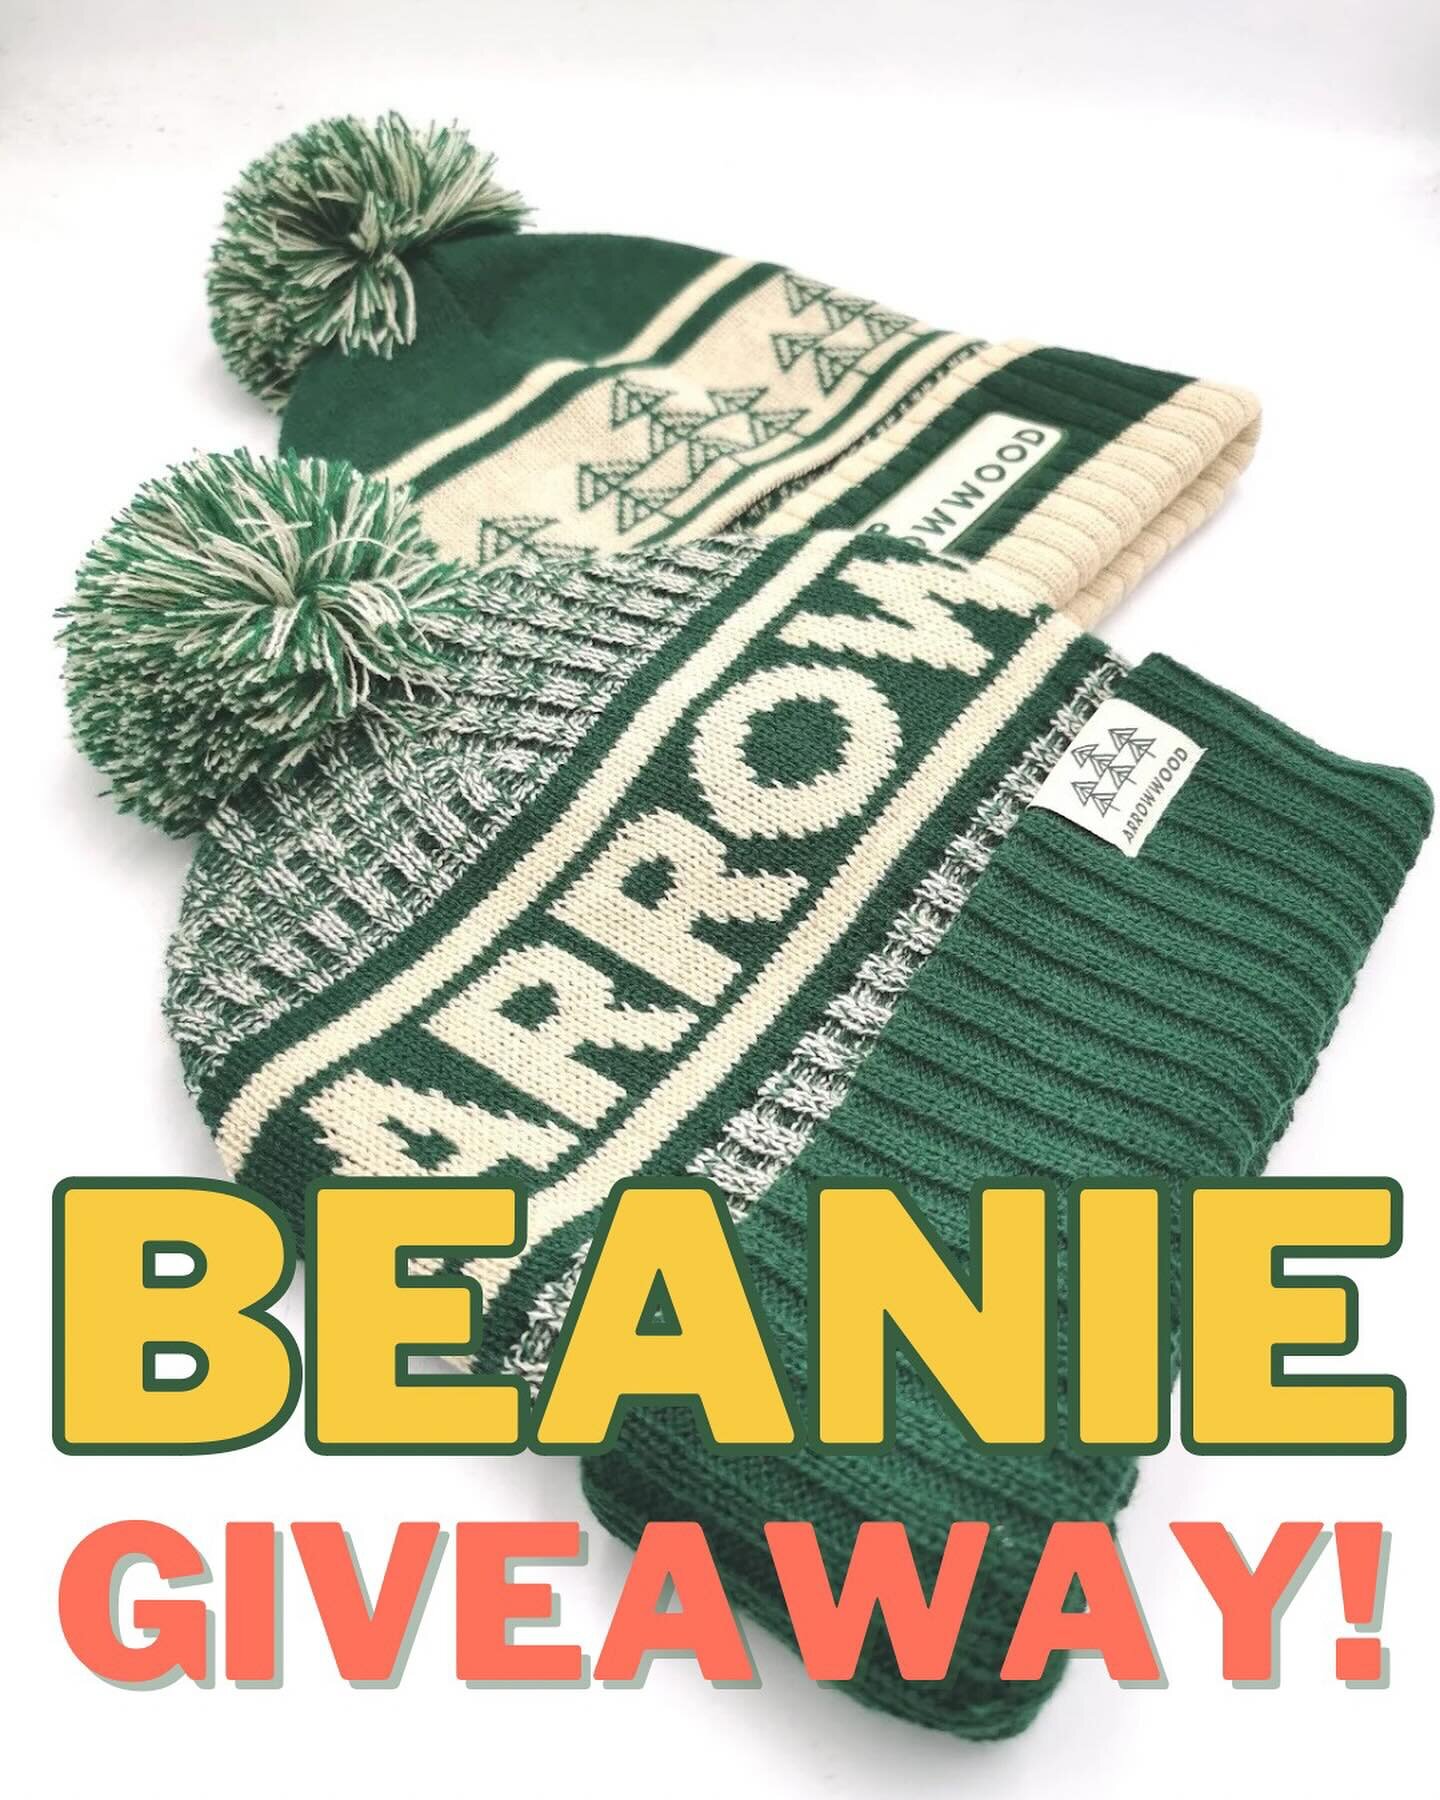 **Camp Arrowwood Winter Beanie Giveaway**

We've had a lot of requests to buy our winter beanies, so we'll just give some away! ❄️ 

To enter, all you have to do is:

1. Follow our Instagram page @camparrowwood
2. Tag two friends in the comments
3. C